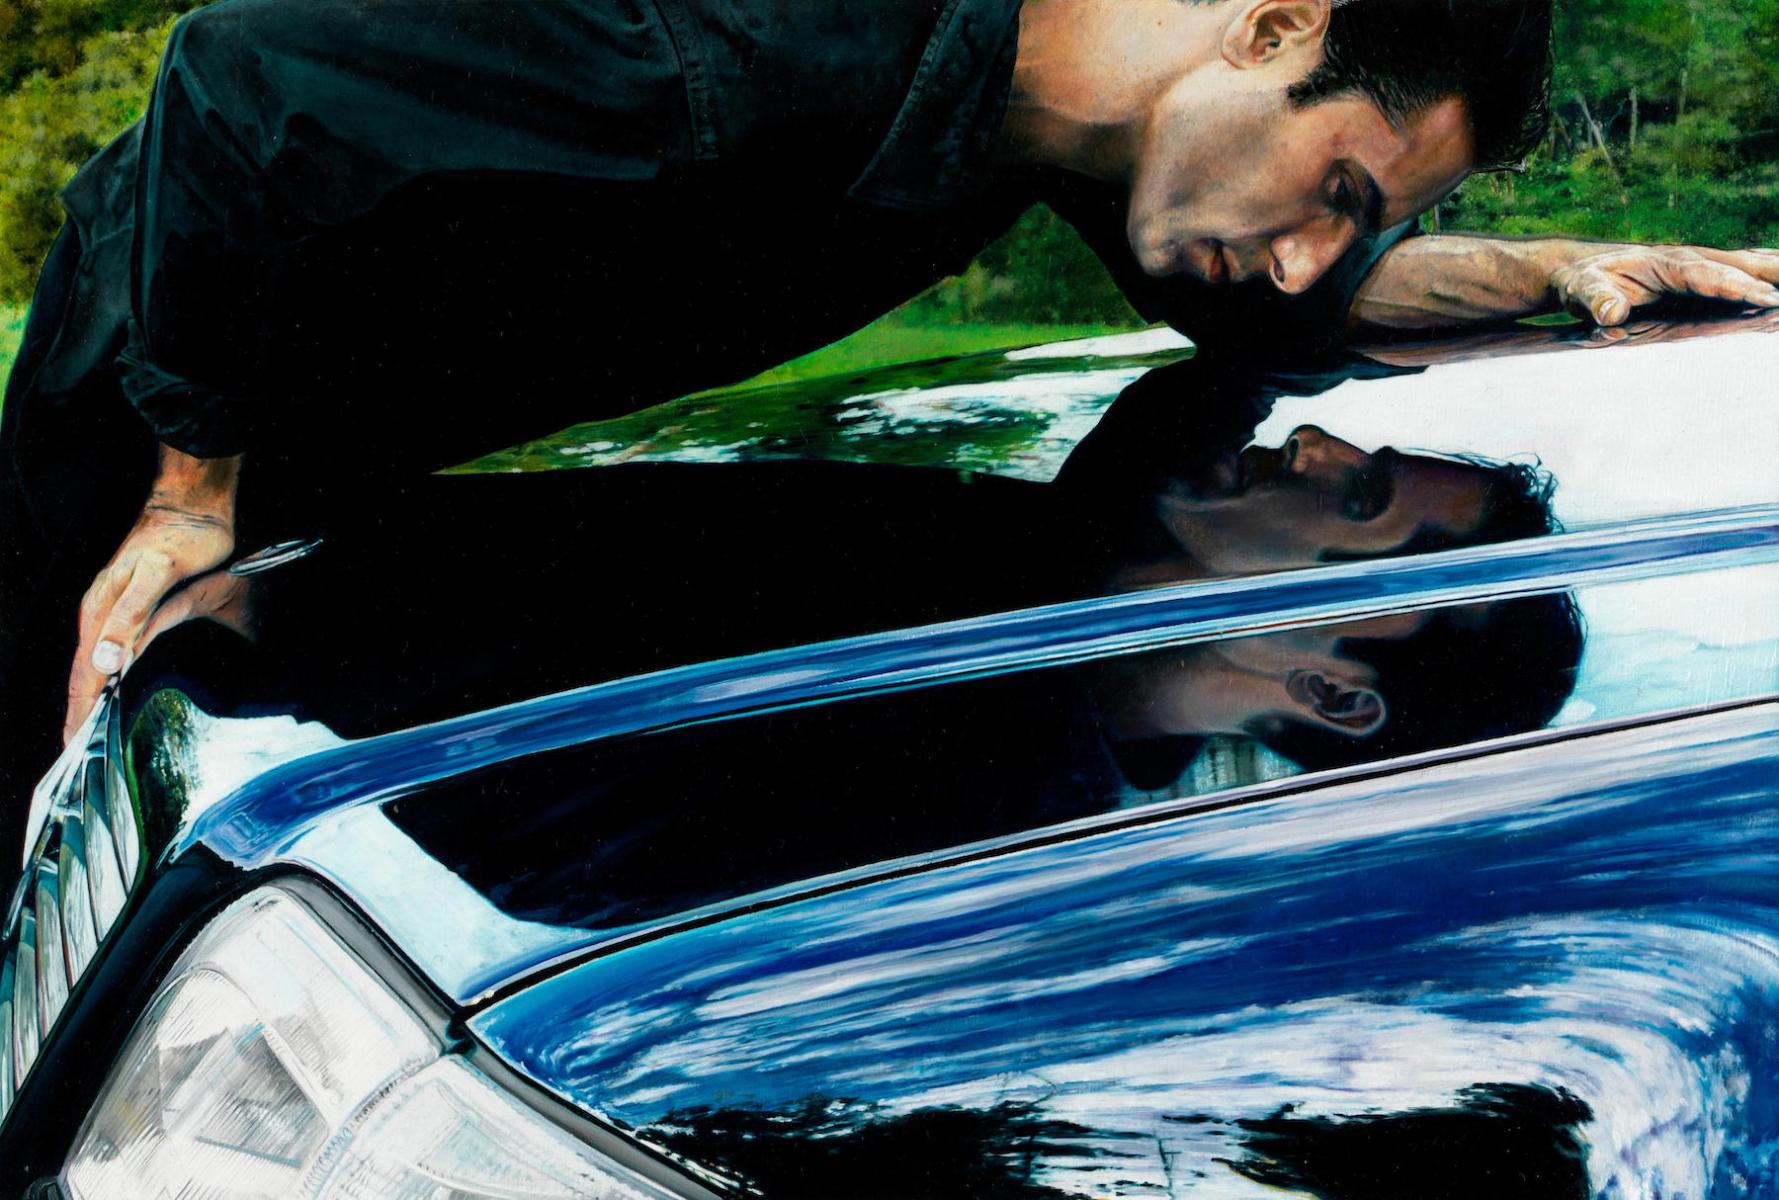 A photorealistic painting shows a man leaning over a car to gaze at his own reflection